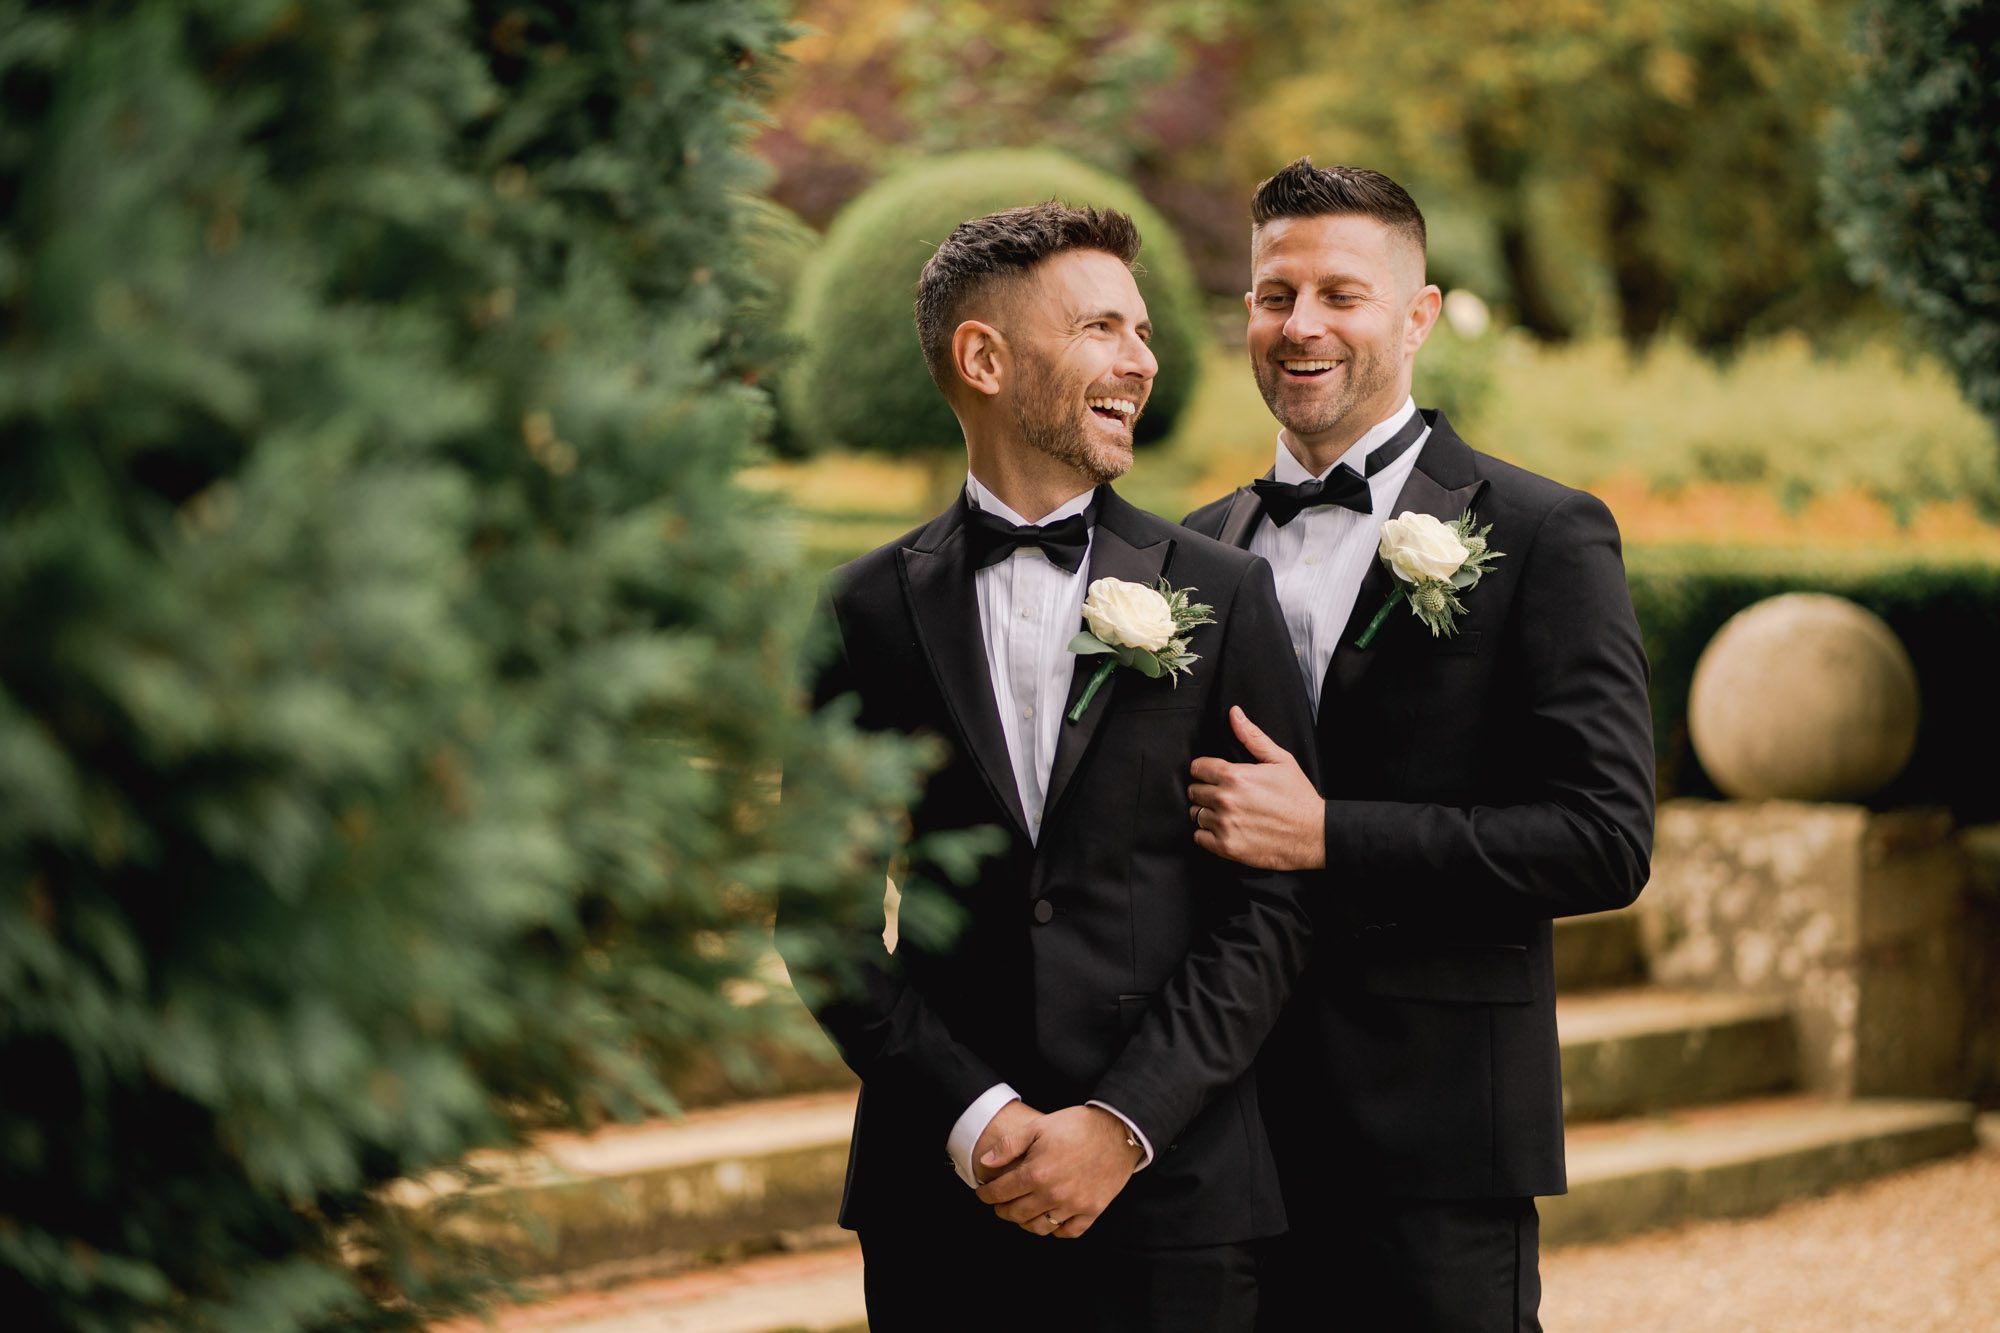 Two grooms laugh together on their wedding dayat Wotton House.